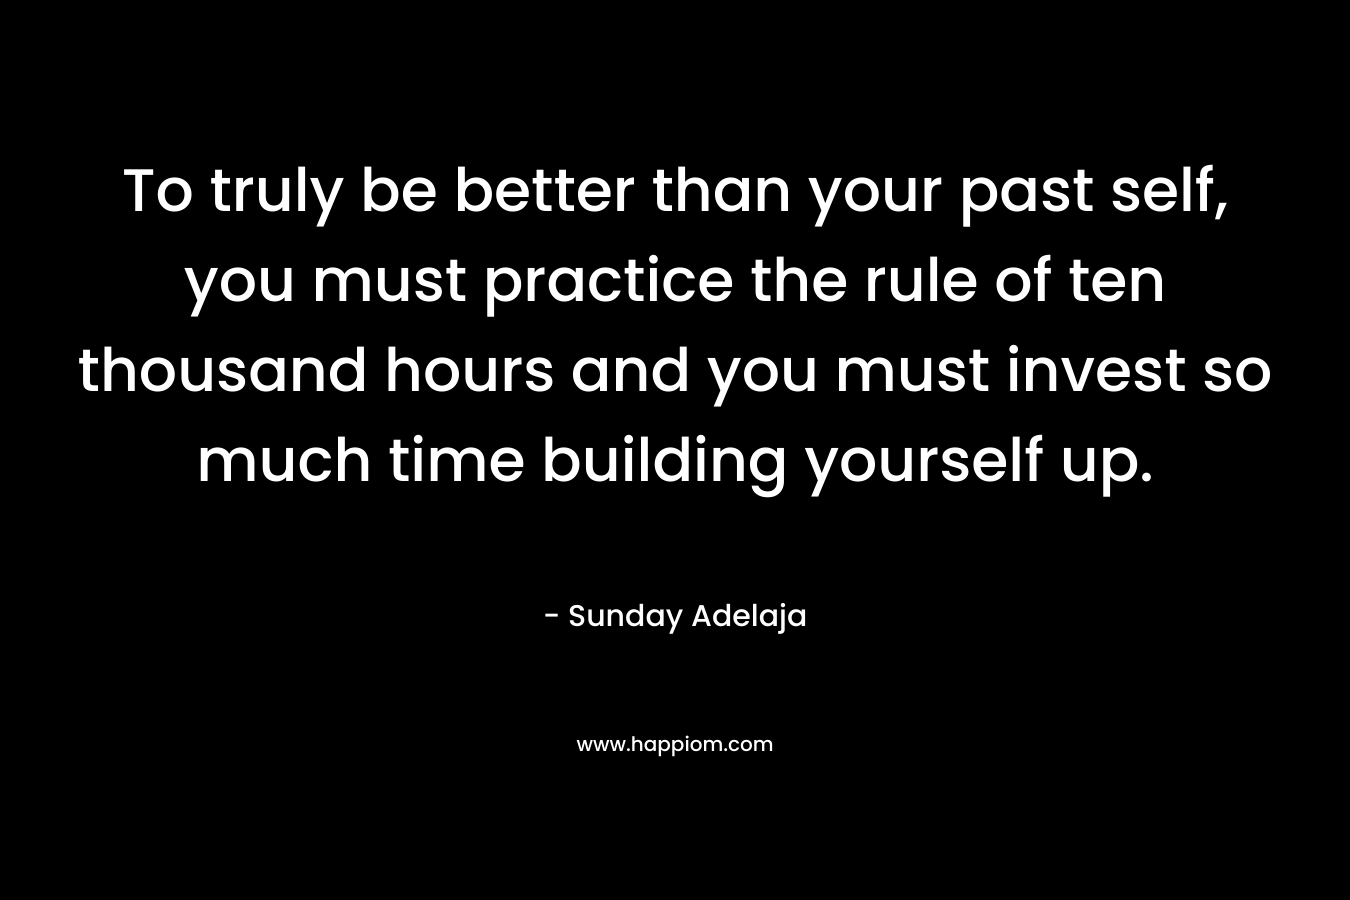 To truly be better than your past self, you must practice the rule of ten thousand hours and you must invest so much time building yourself up.